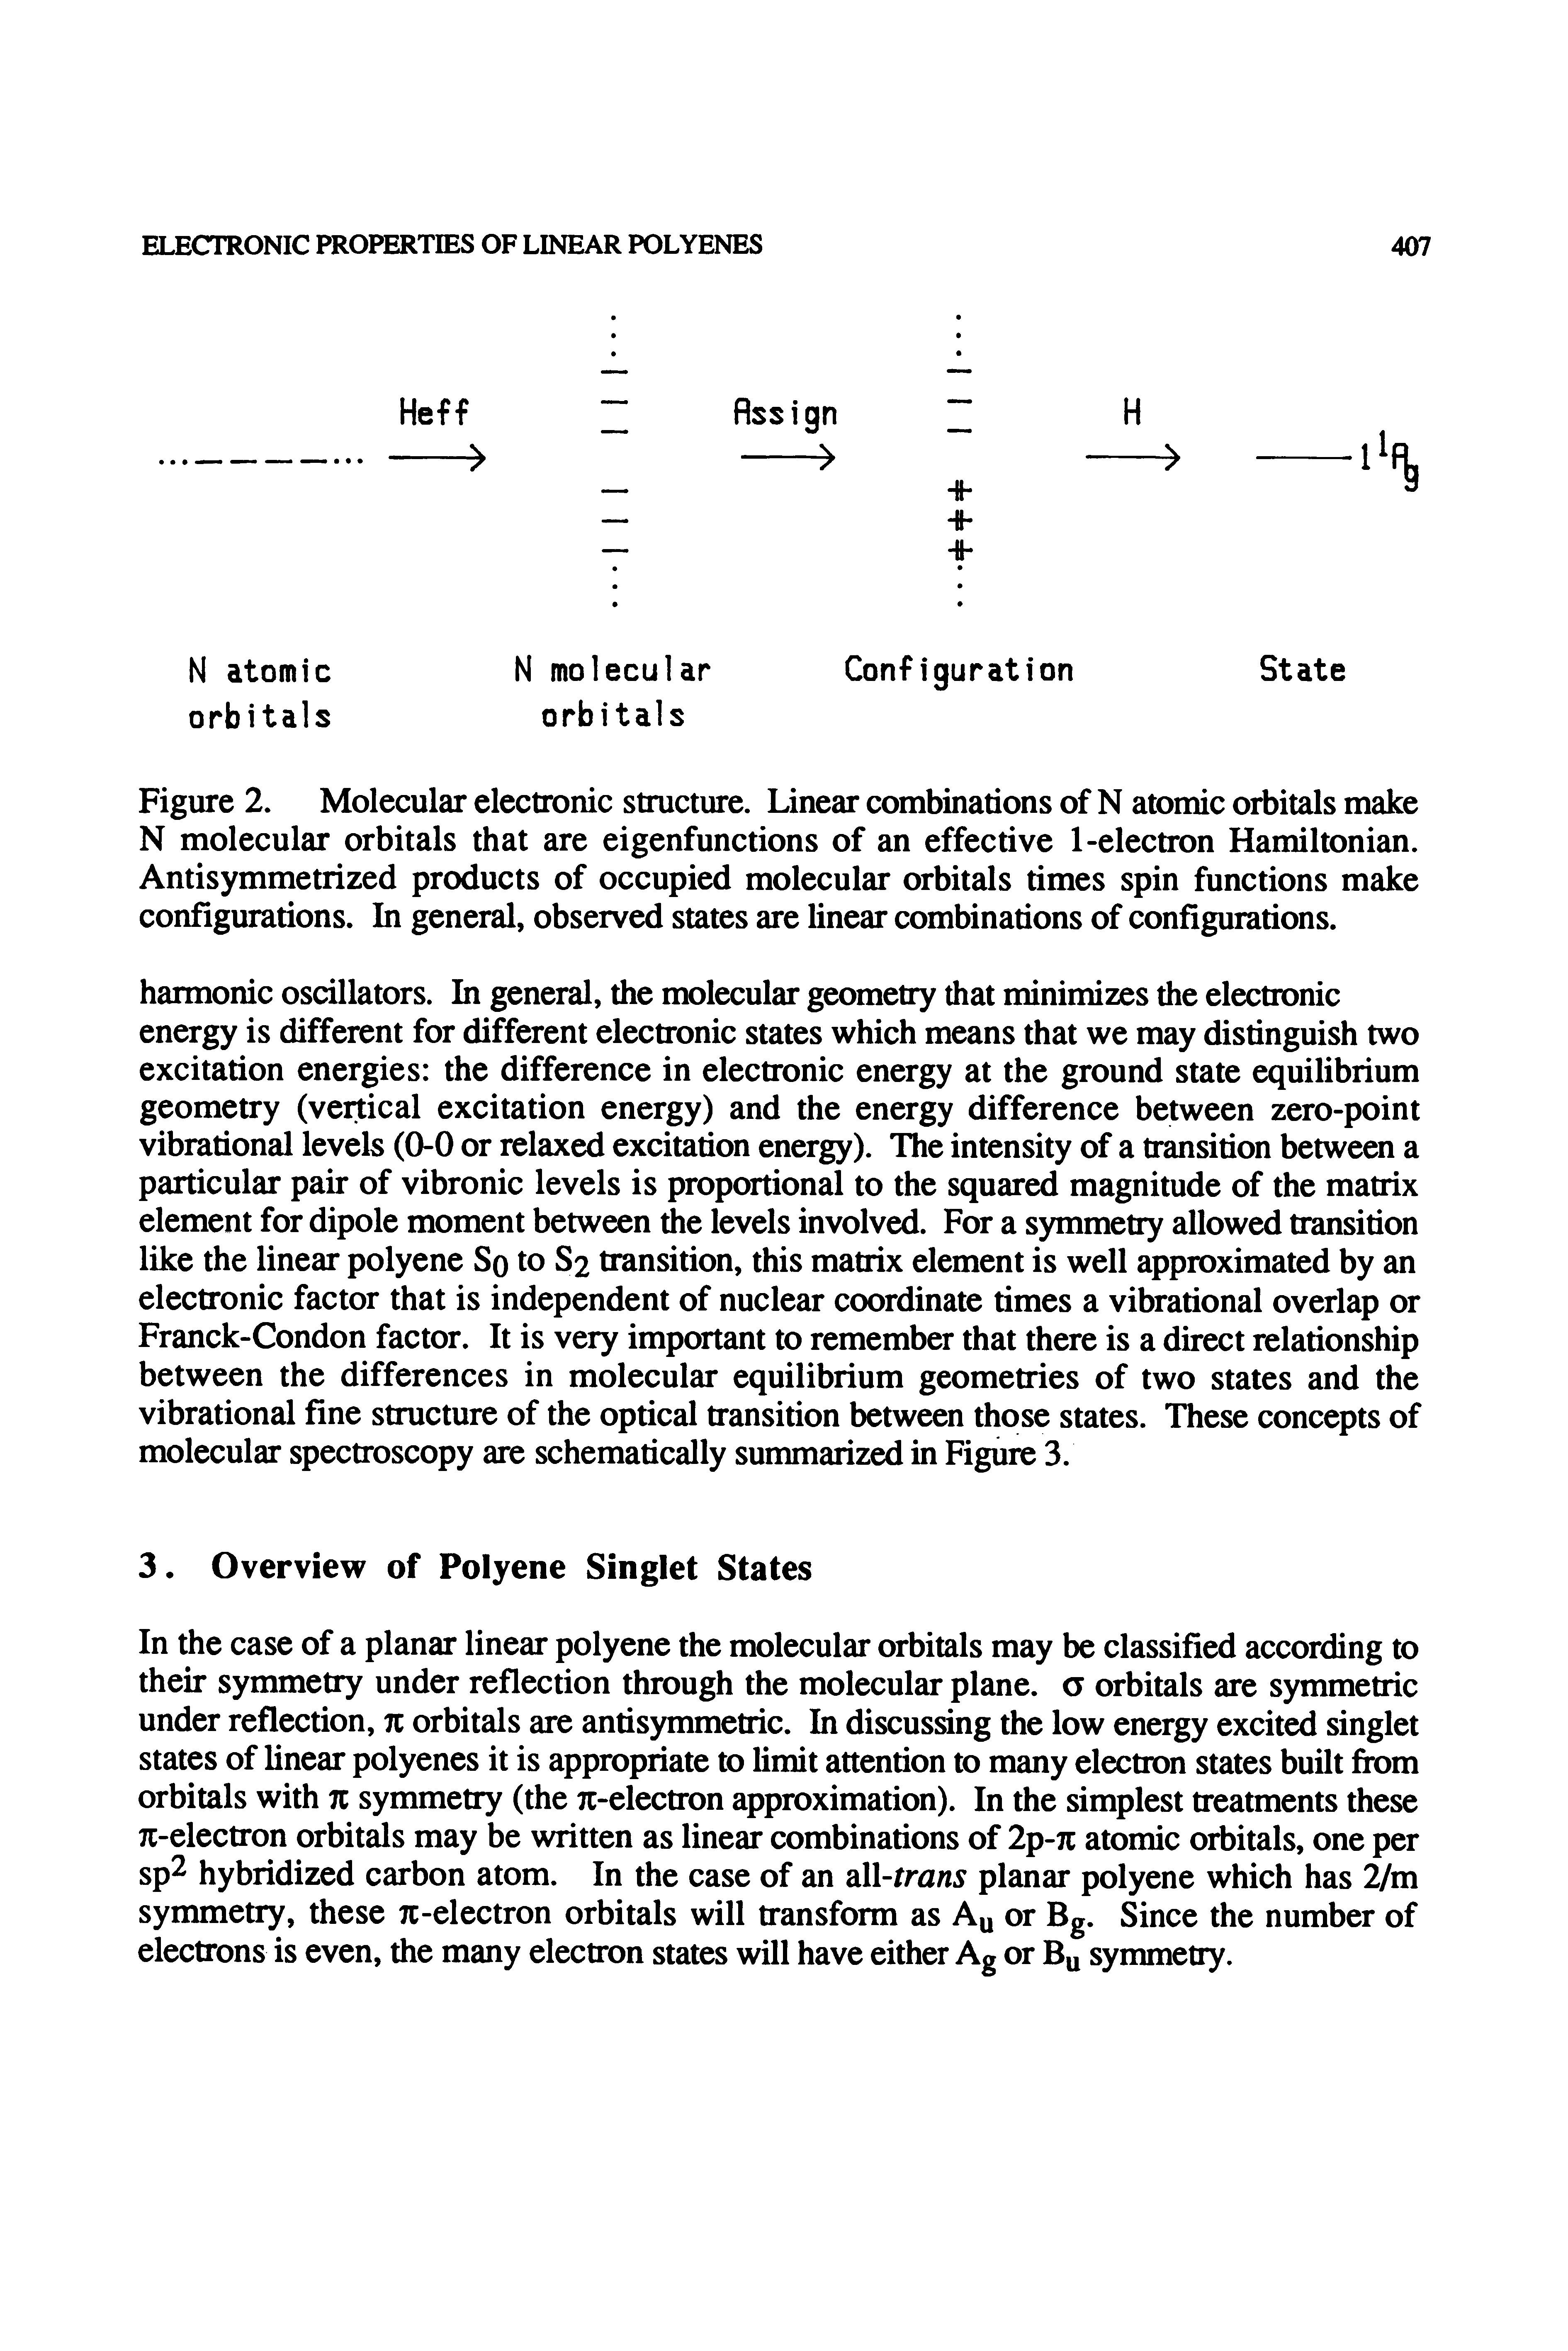 Figure 2. Molecular electronic structure. Linear combinations of N atomic orbitals make N molecular orbitals that are eigenfunctions of an effective 1-electron Hamiltonian. Antisymmetrized products of occupied molecular orbitals times spin functions make configurations. In general, observed states are linear combinations of configurations.